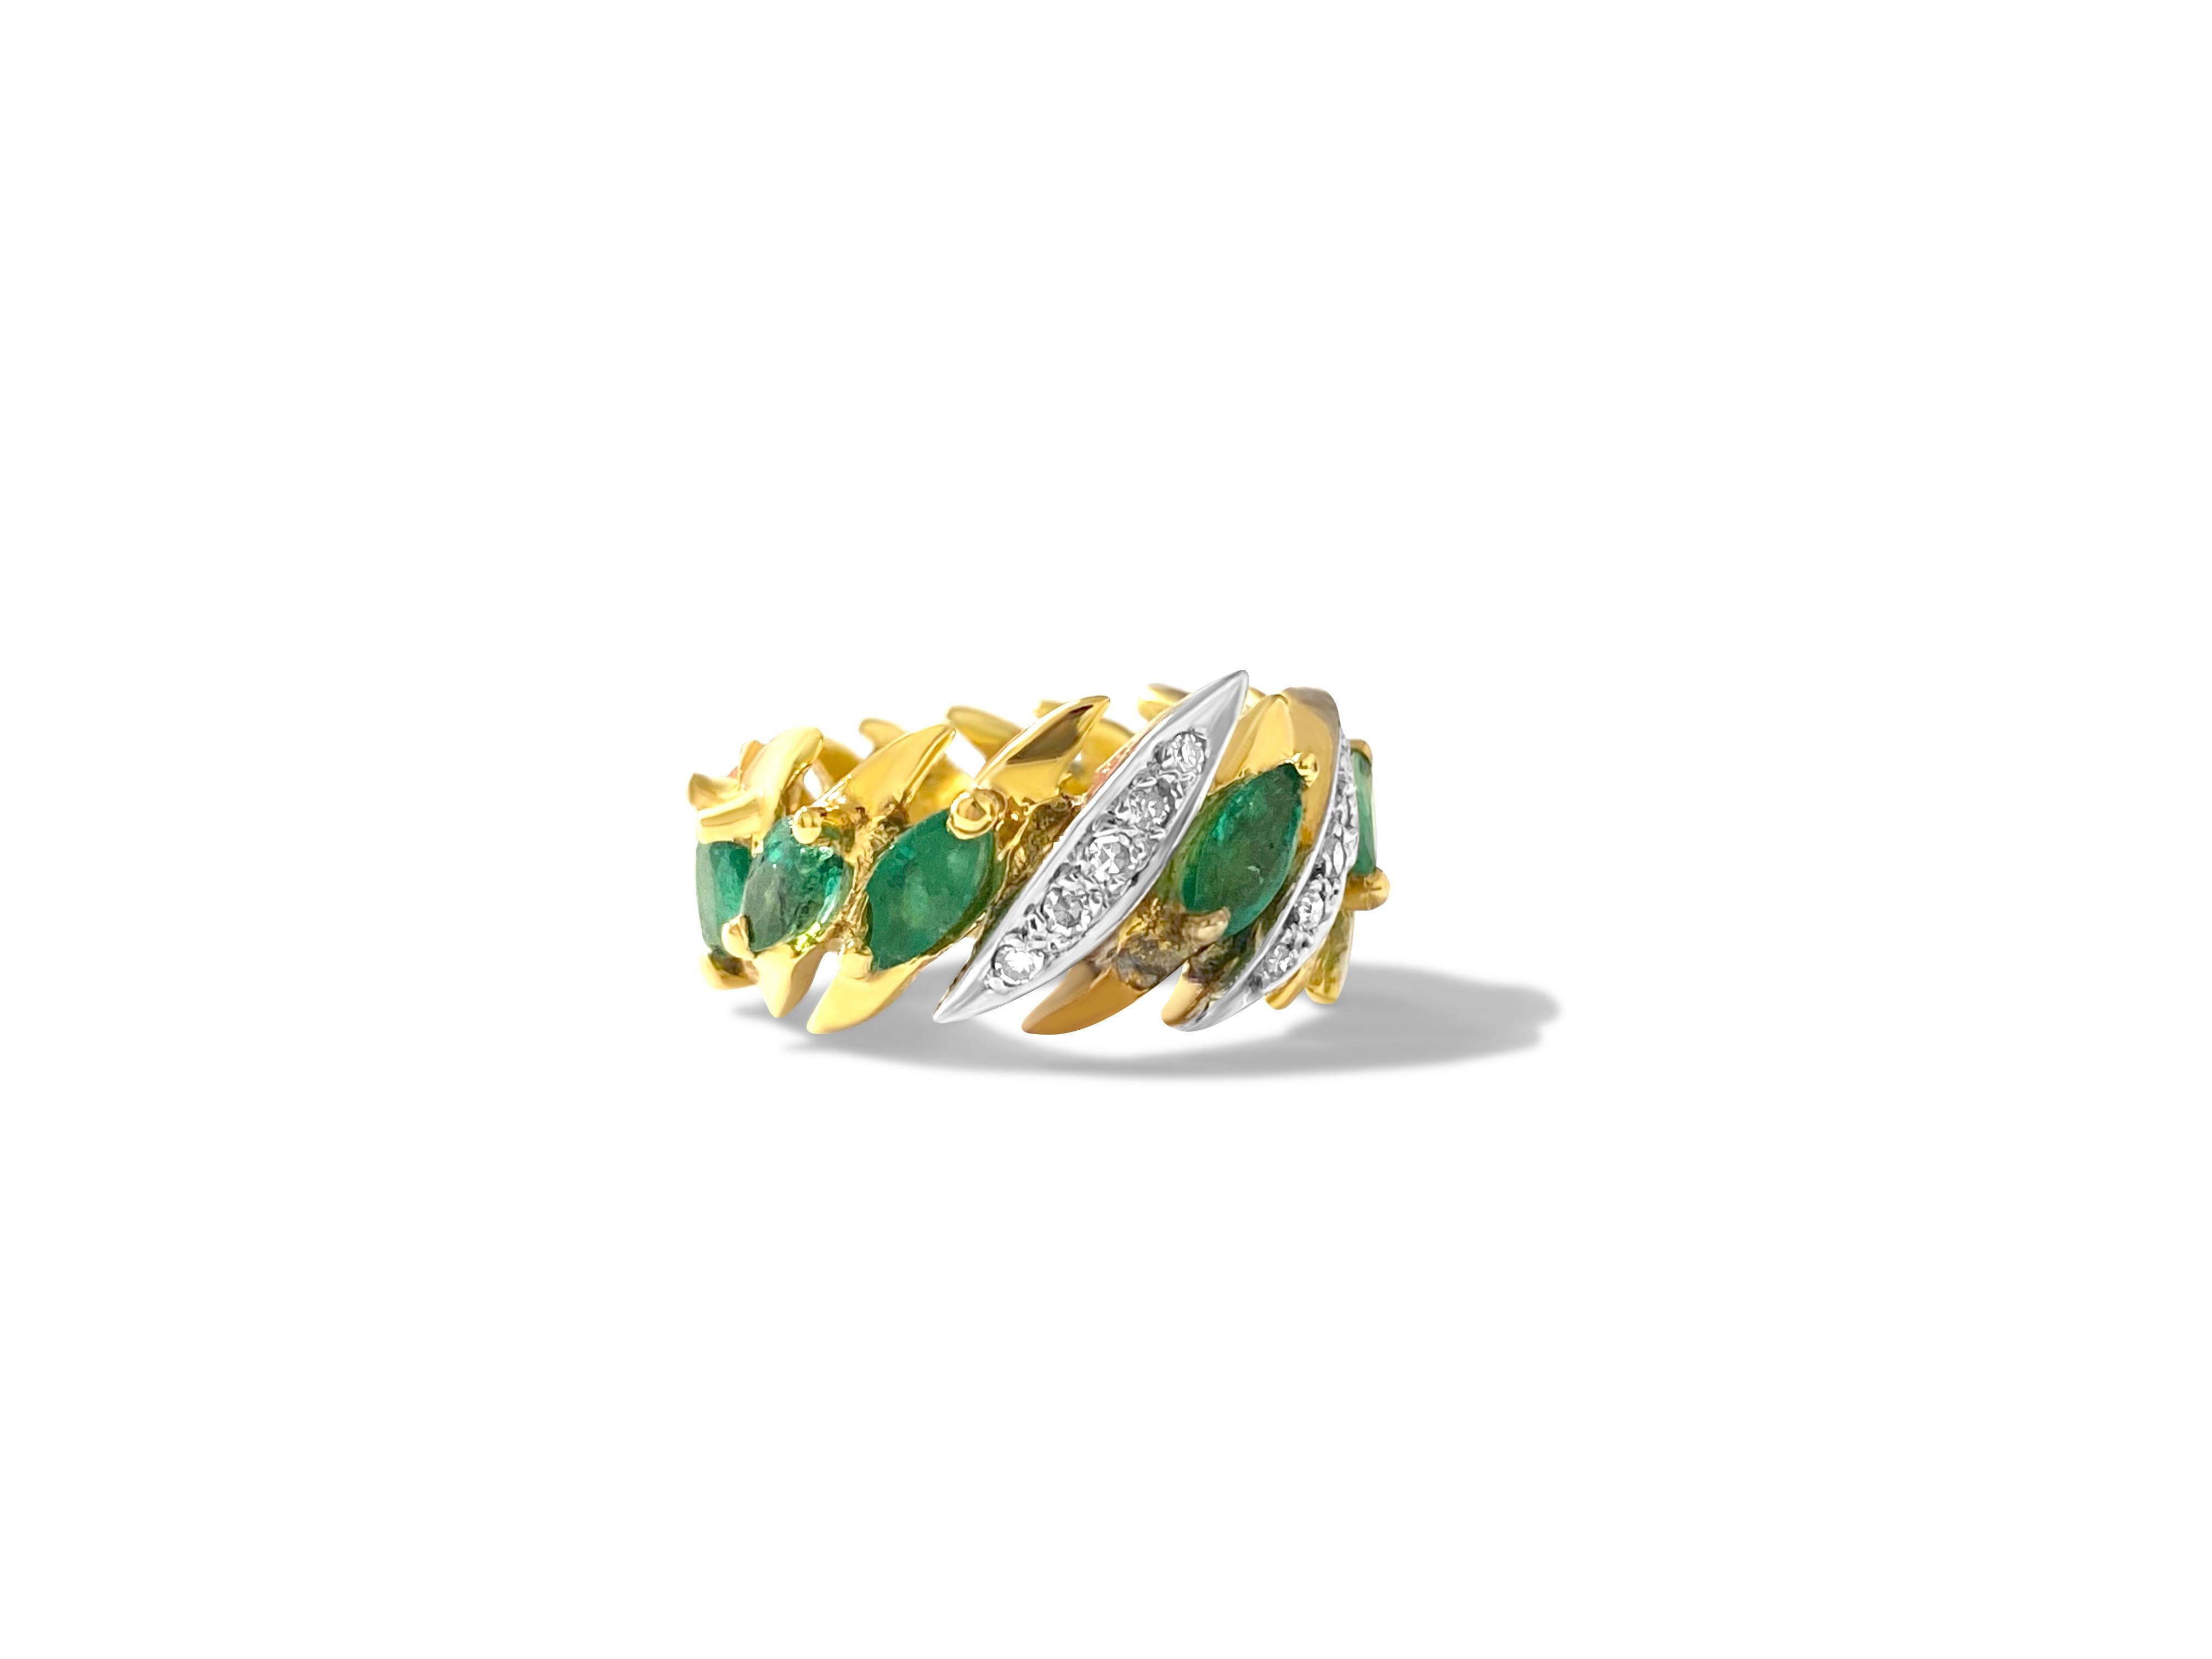 Material: This ring is made of 14K yellow gold. 
The emerald has a marquise shape and weighs 2.75 carats, with 11 natural earth-mined emeralds. 
The gem is of top quality. 
The diamonds, approximately 0.30 carats in total, are round brilliant cut,